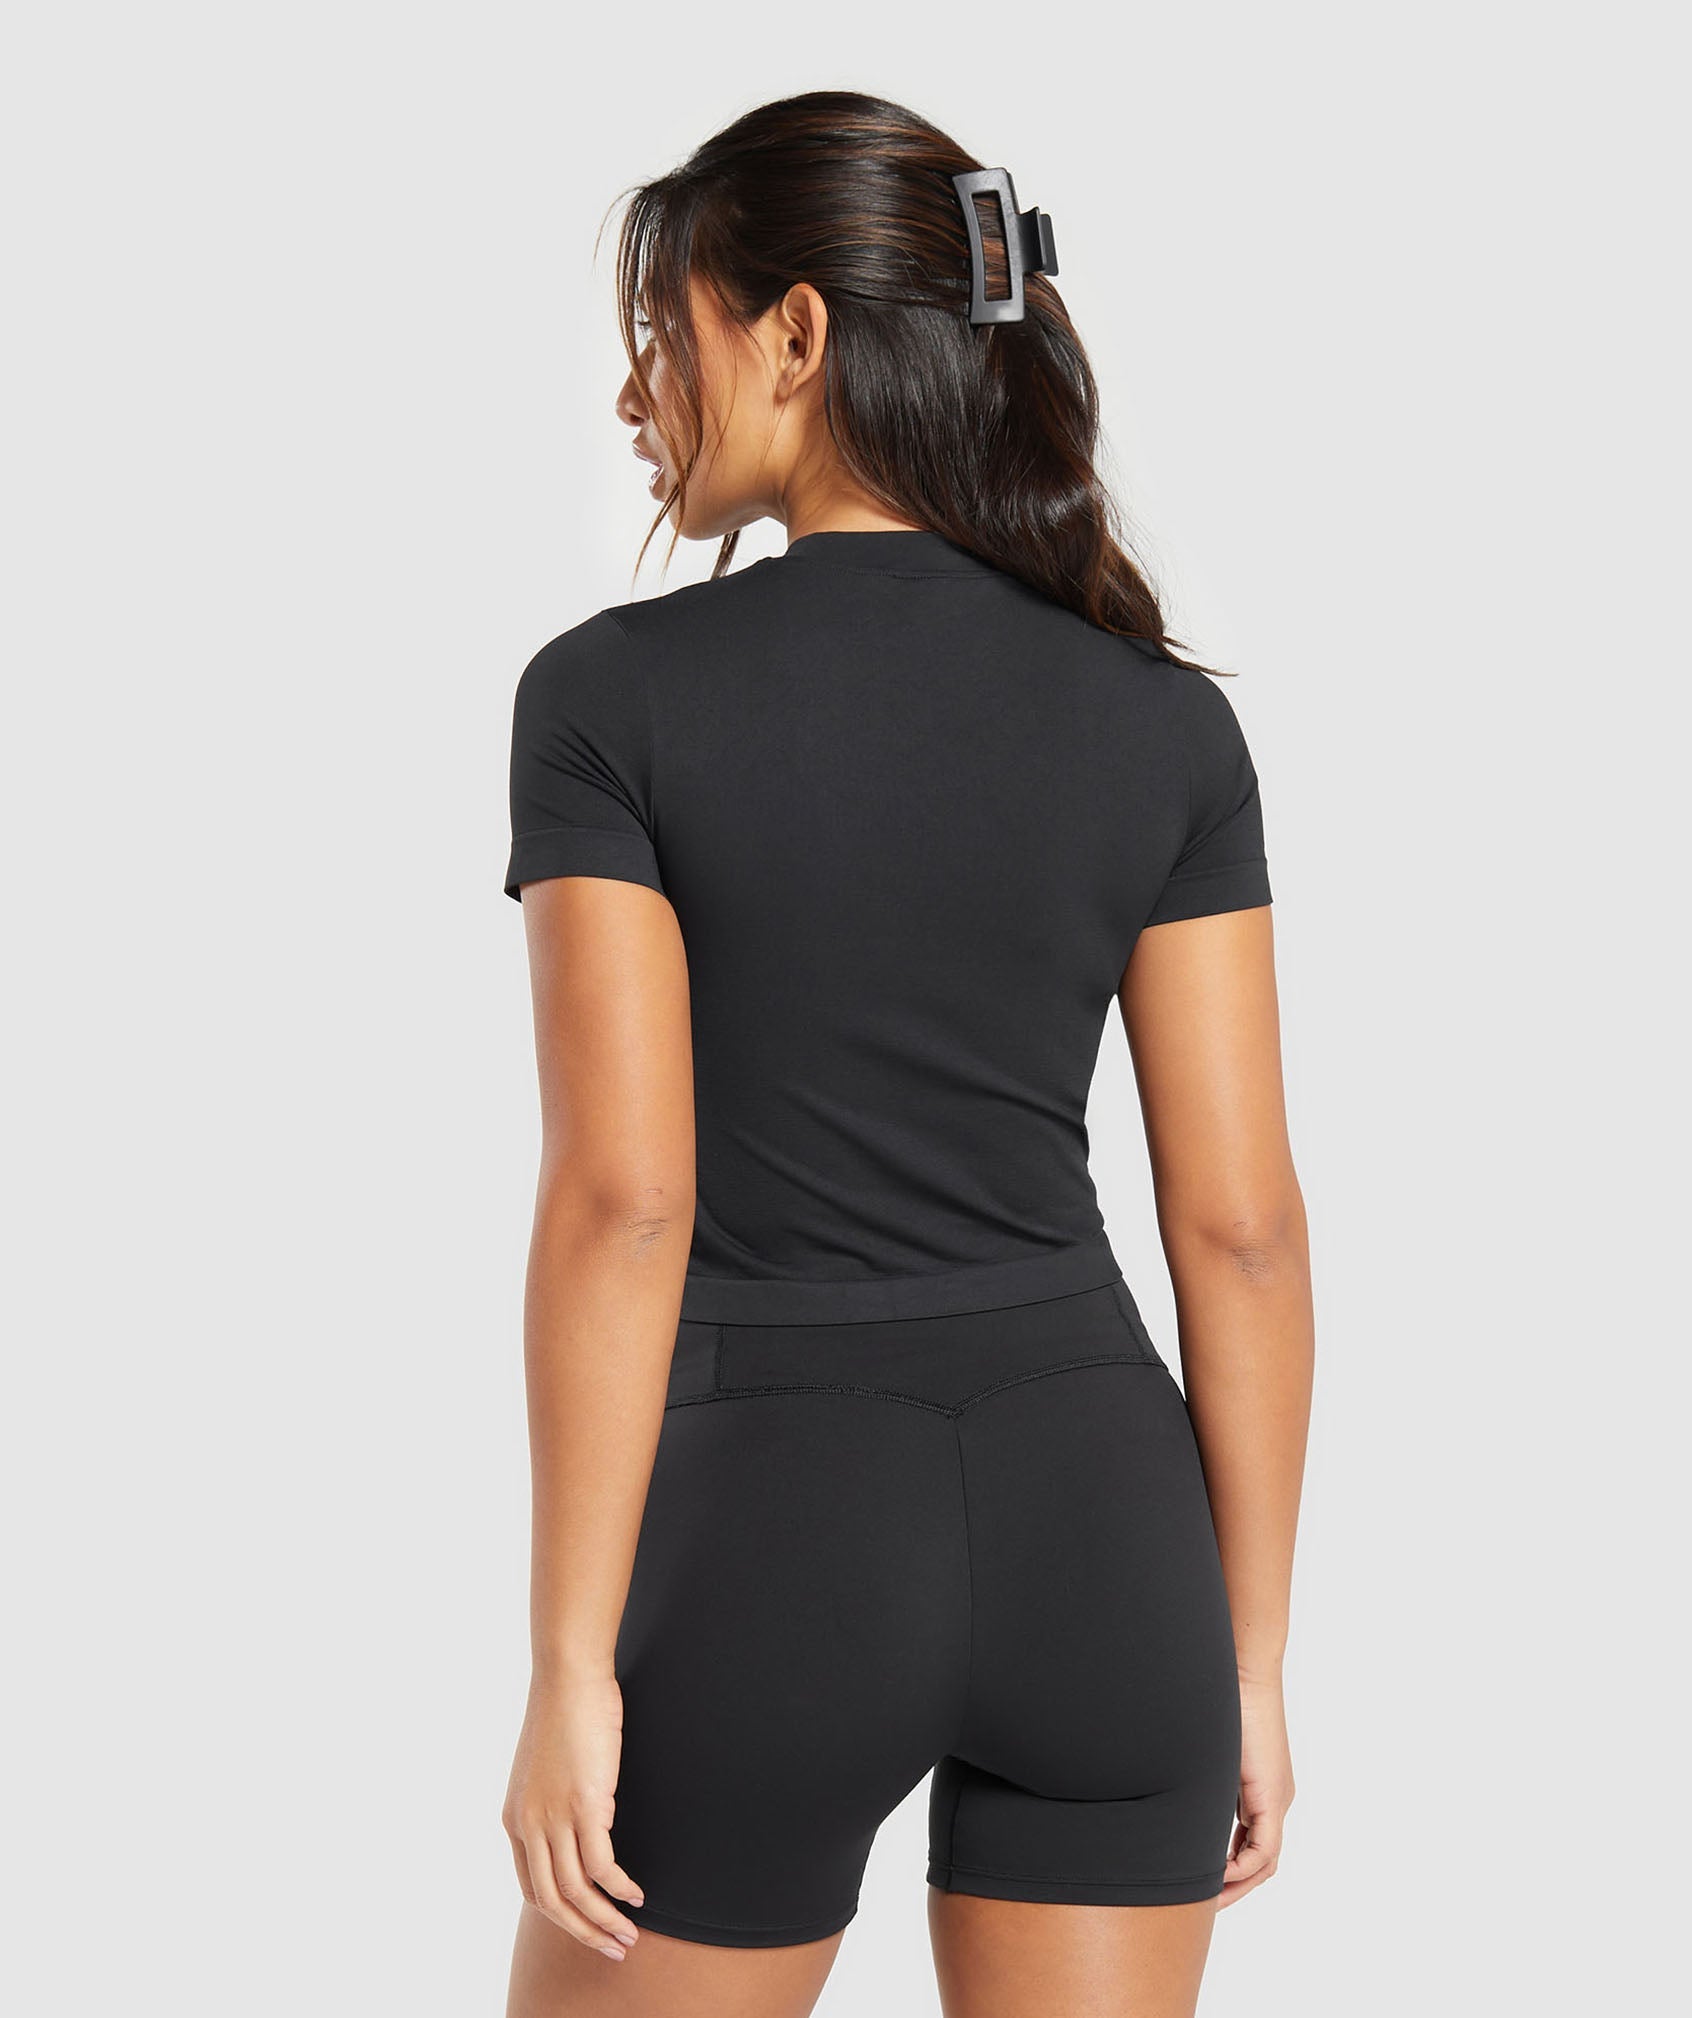 Everyday Seamless Tight Fit Tee in Black - view 2